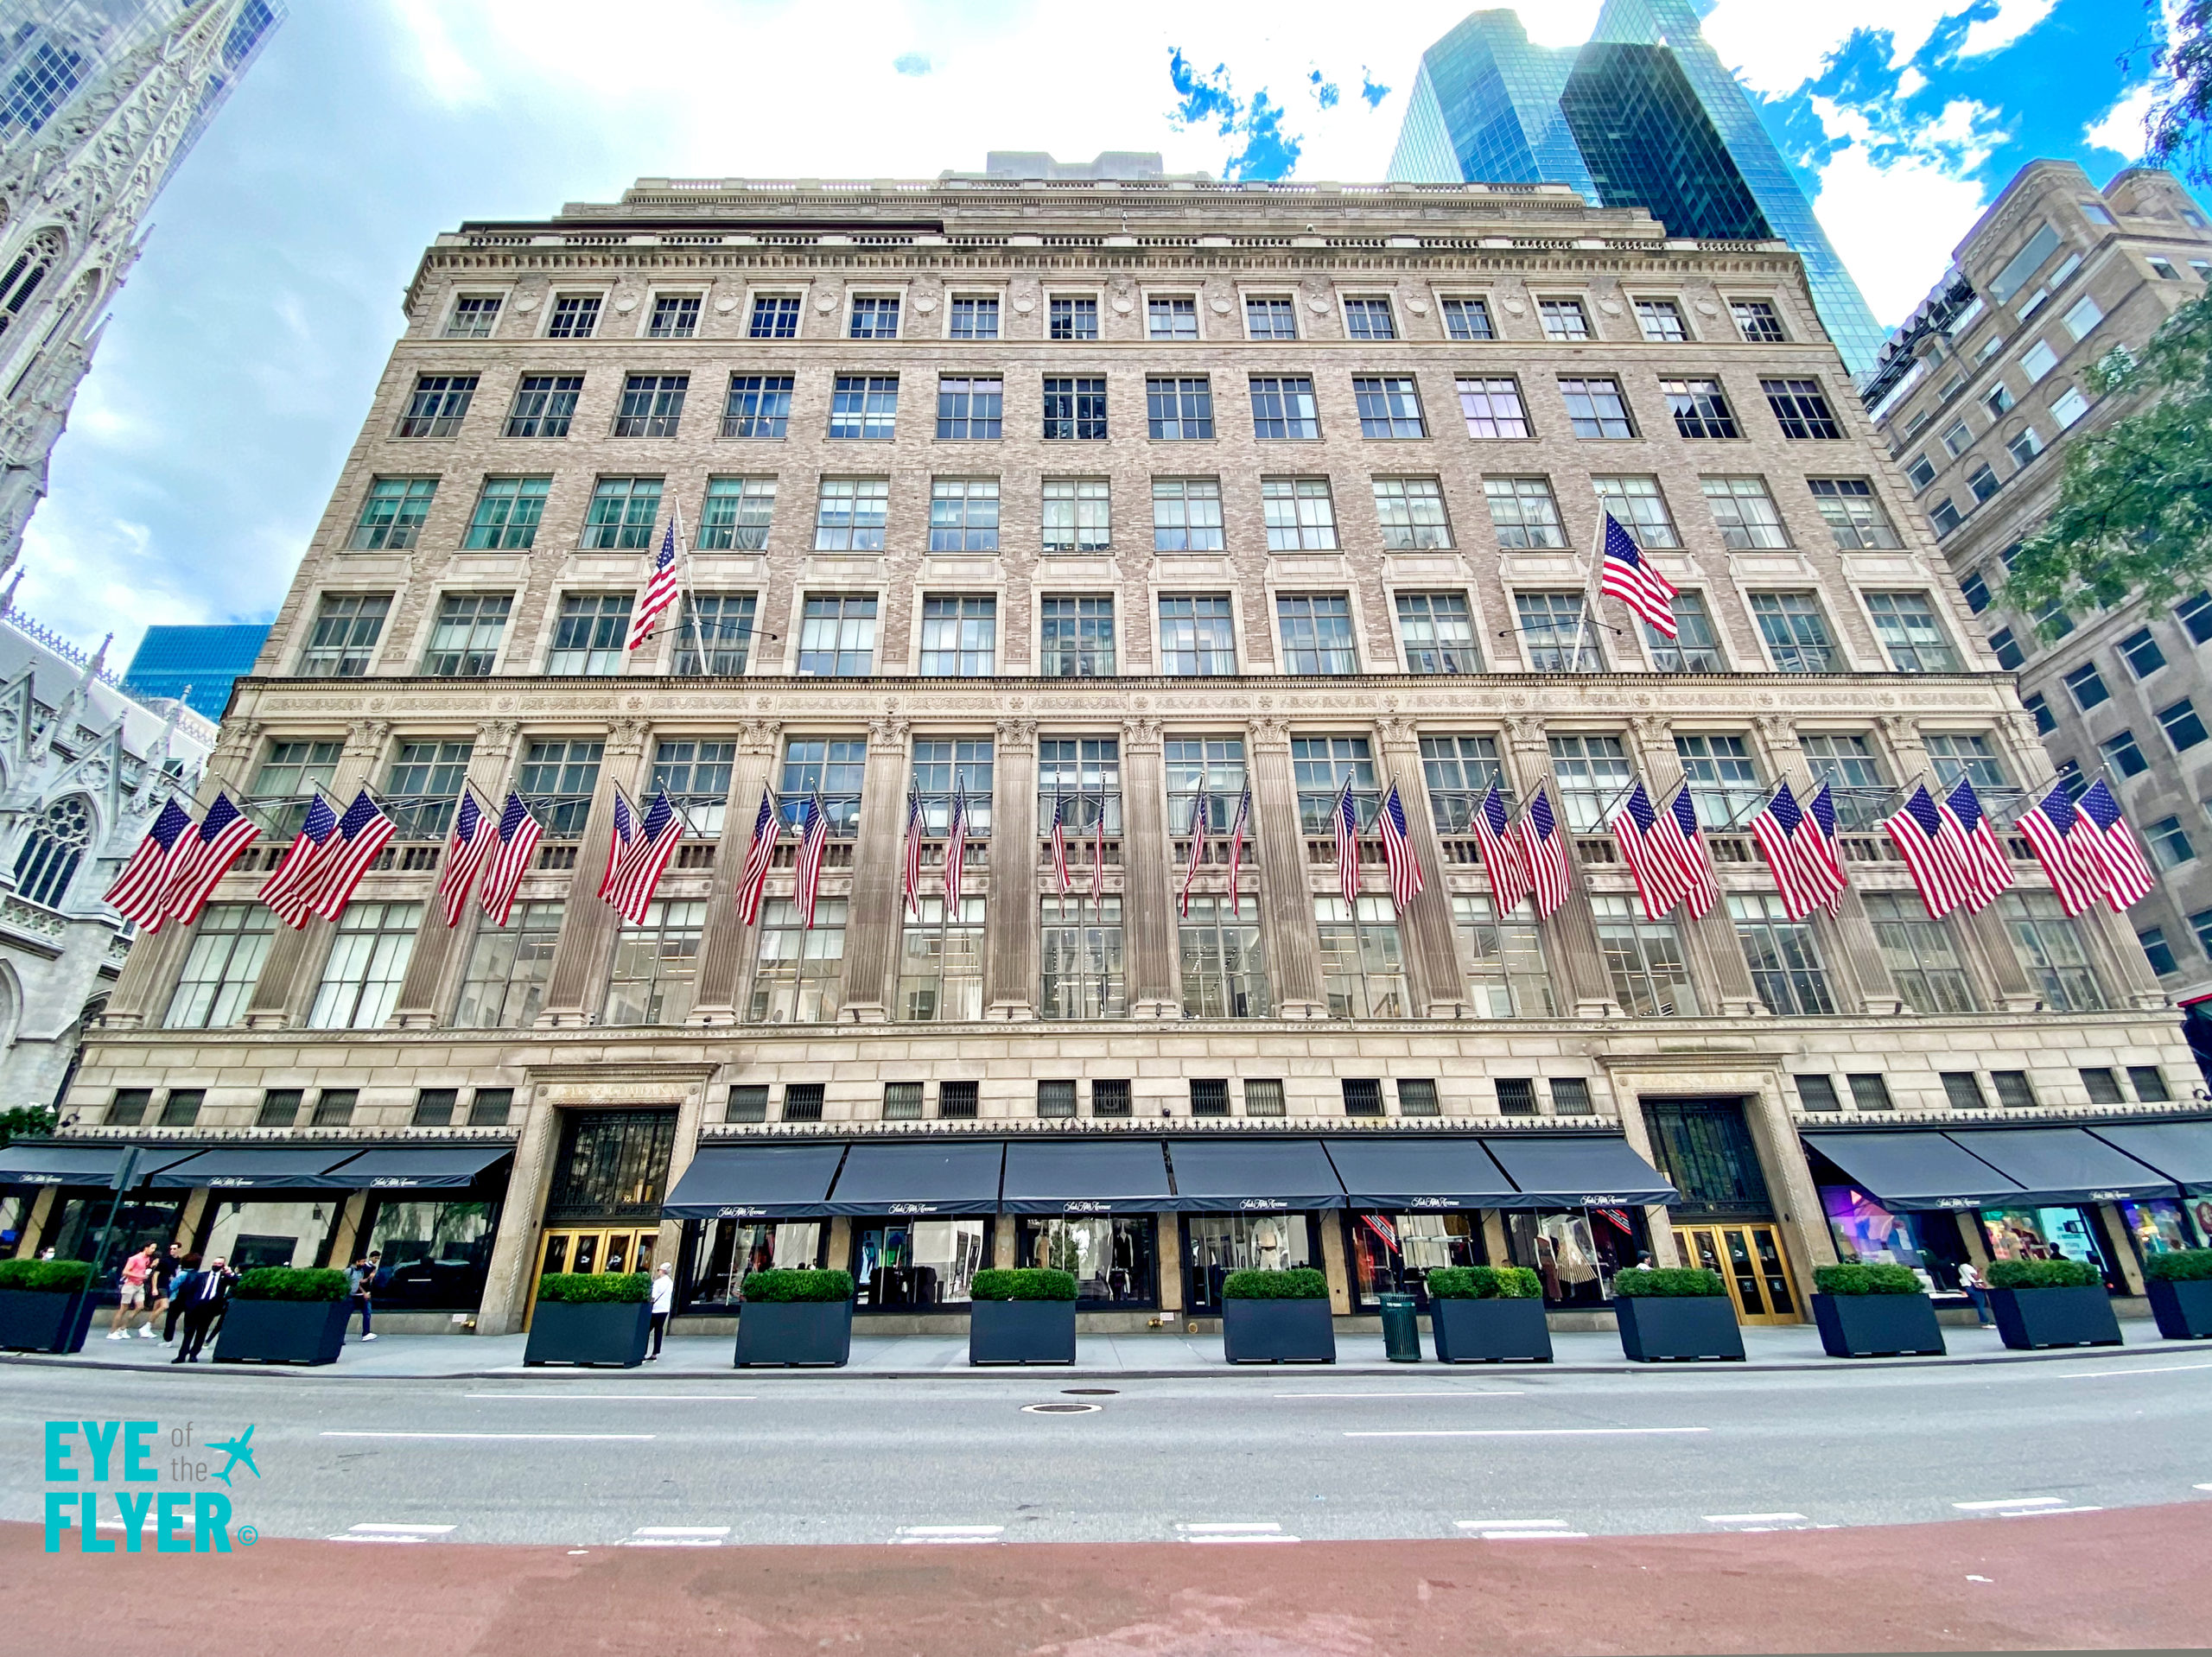 Saks Fifth Avenue Rolls Out Personal Shopping at Hotels